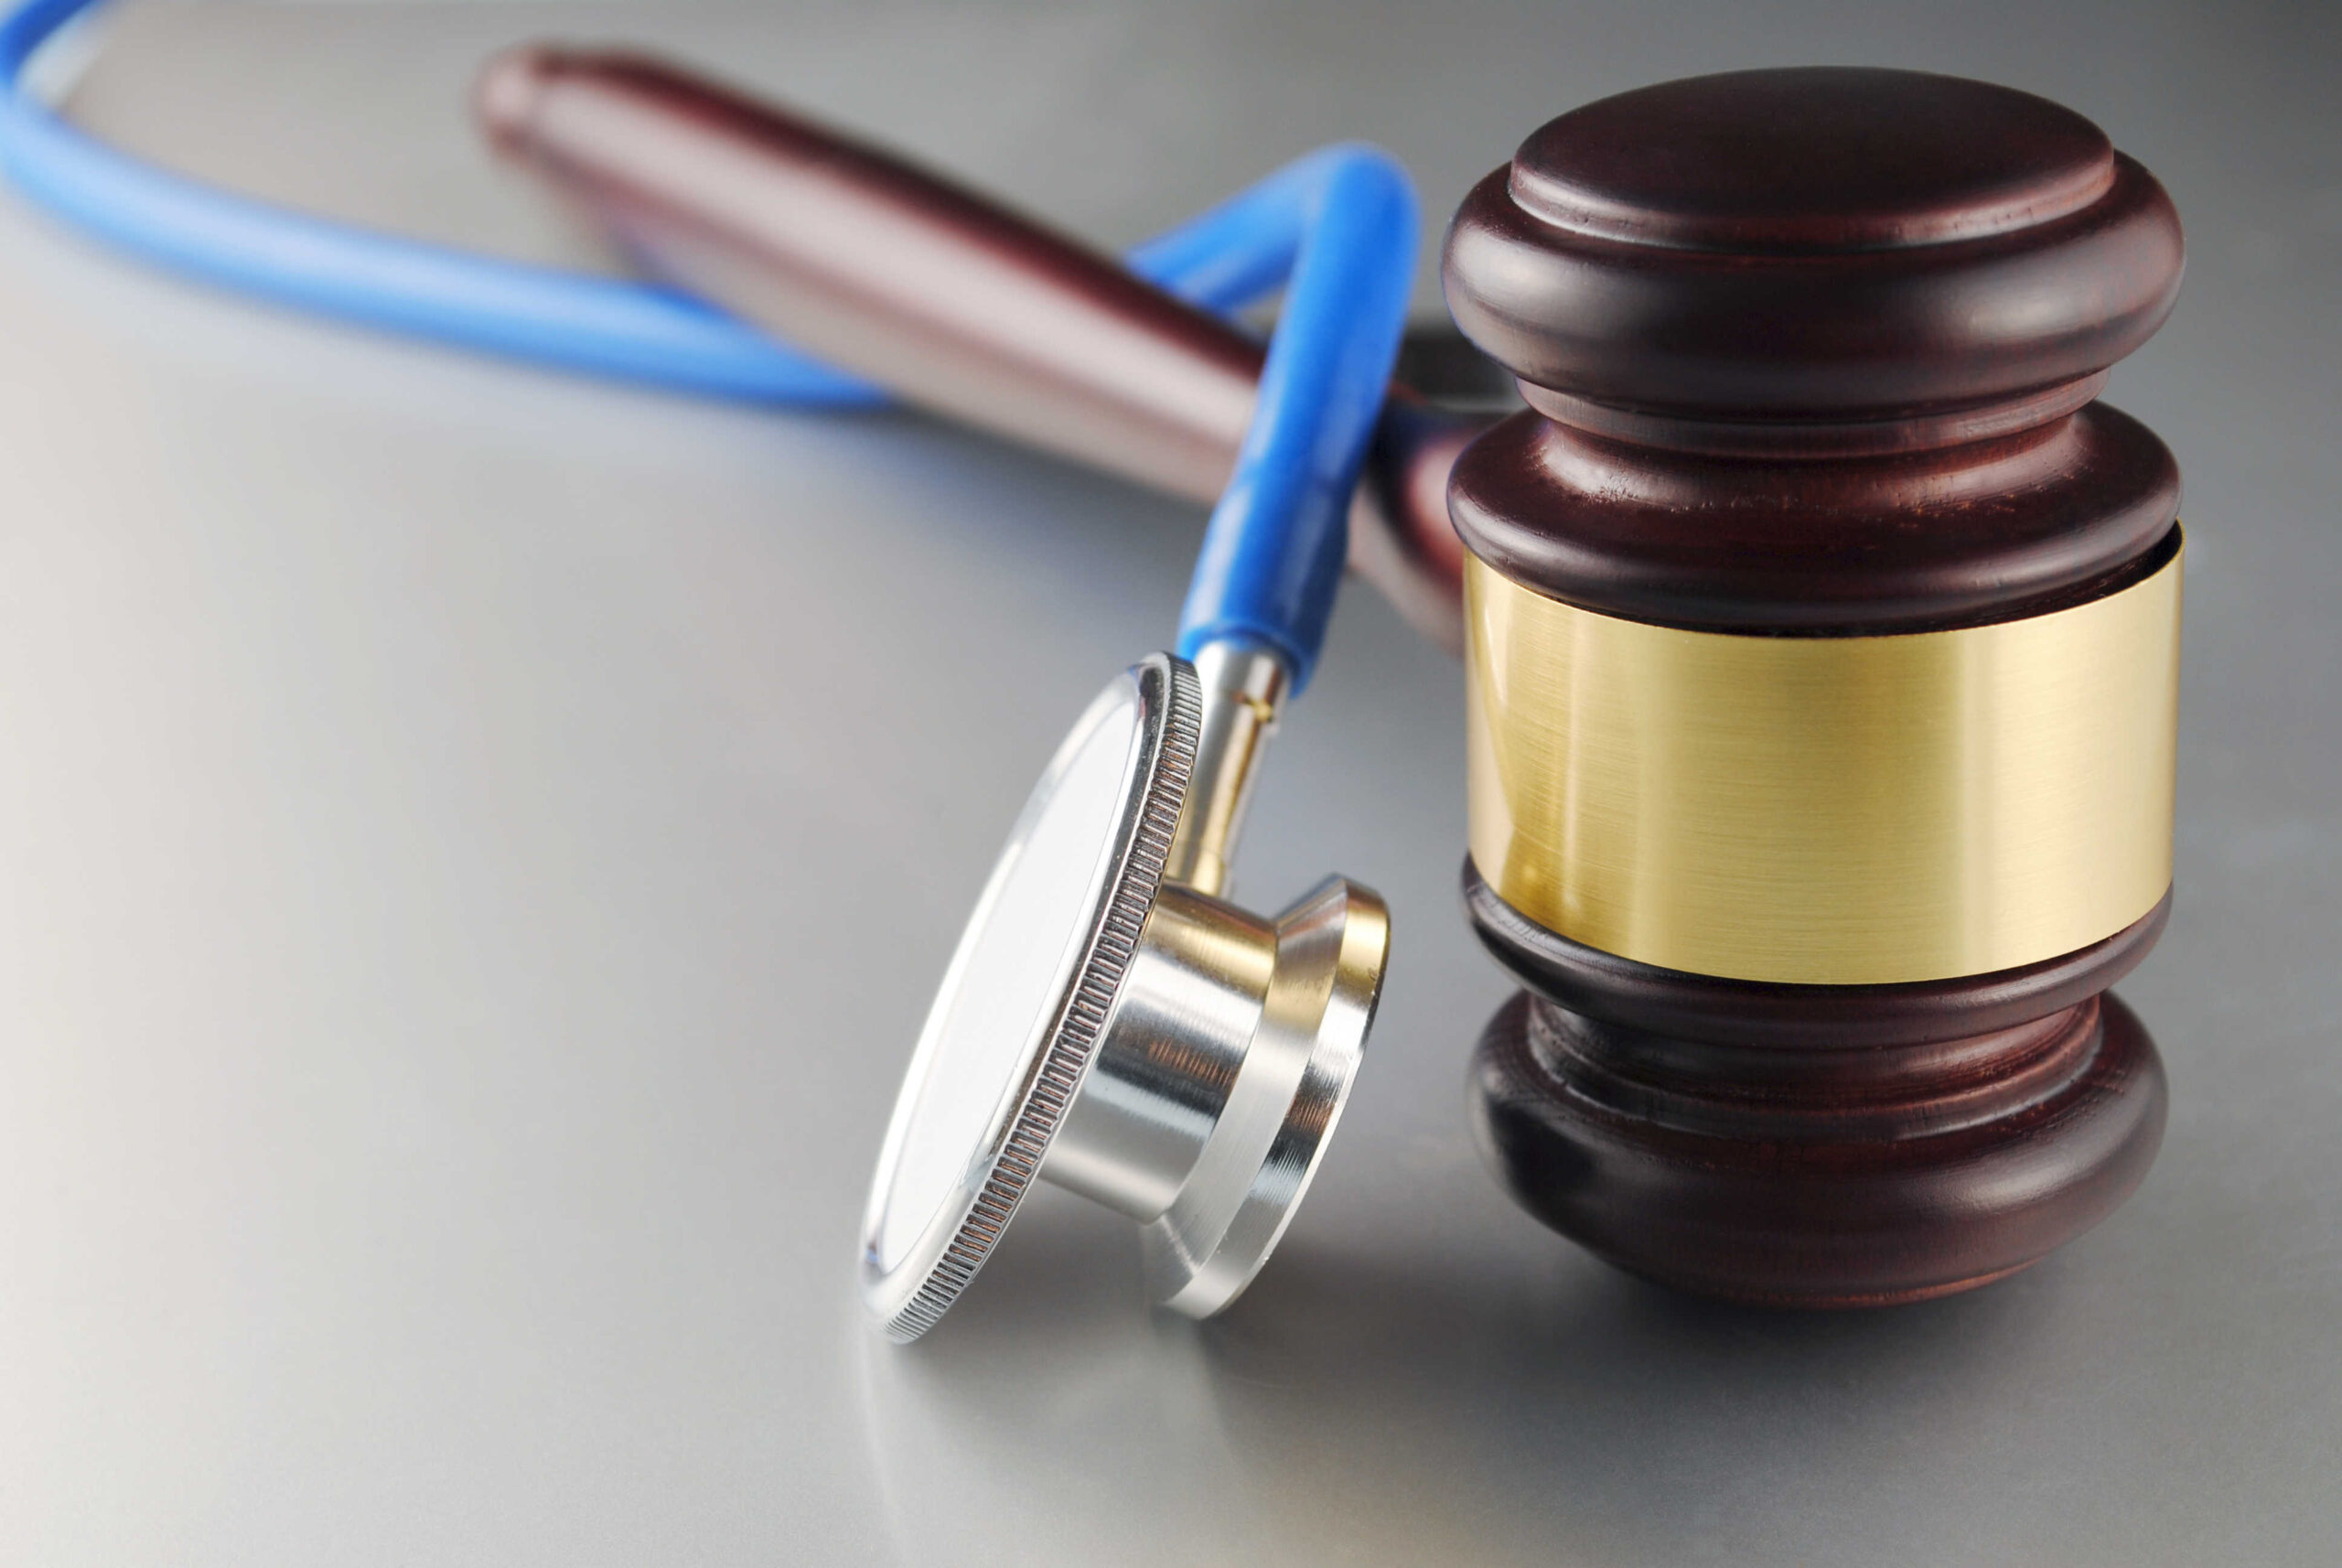 3 Things You Should Know Before Filing a Medical Malpractice Lawsuit